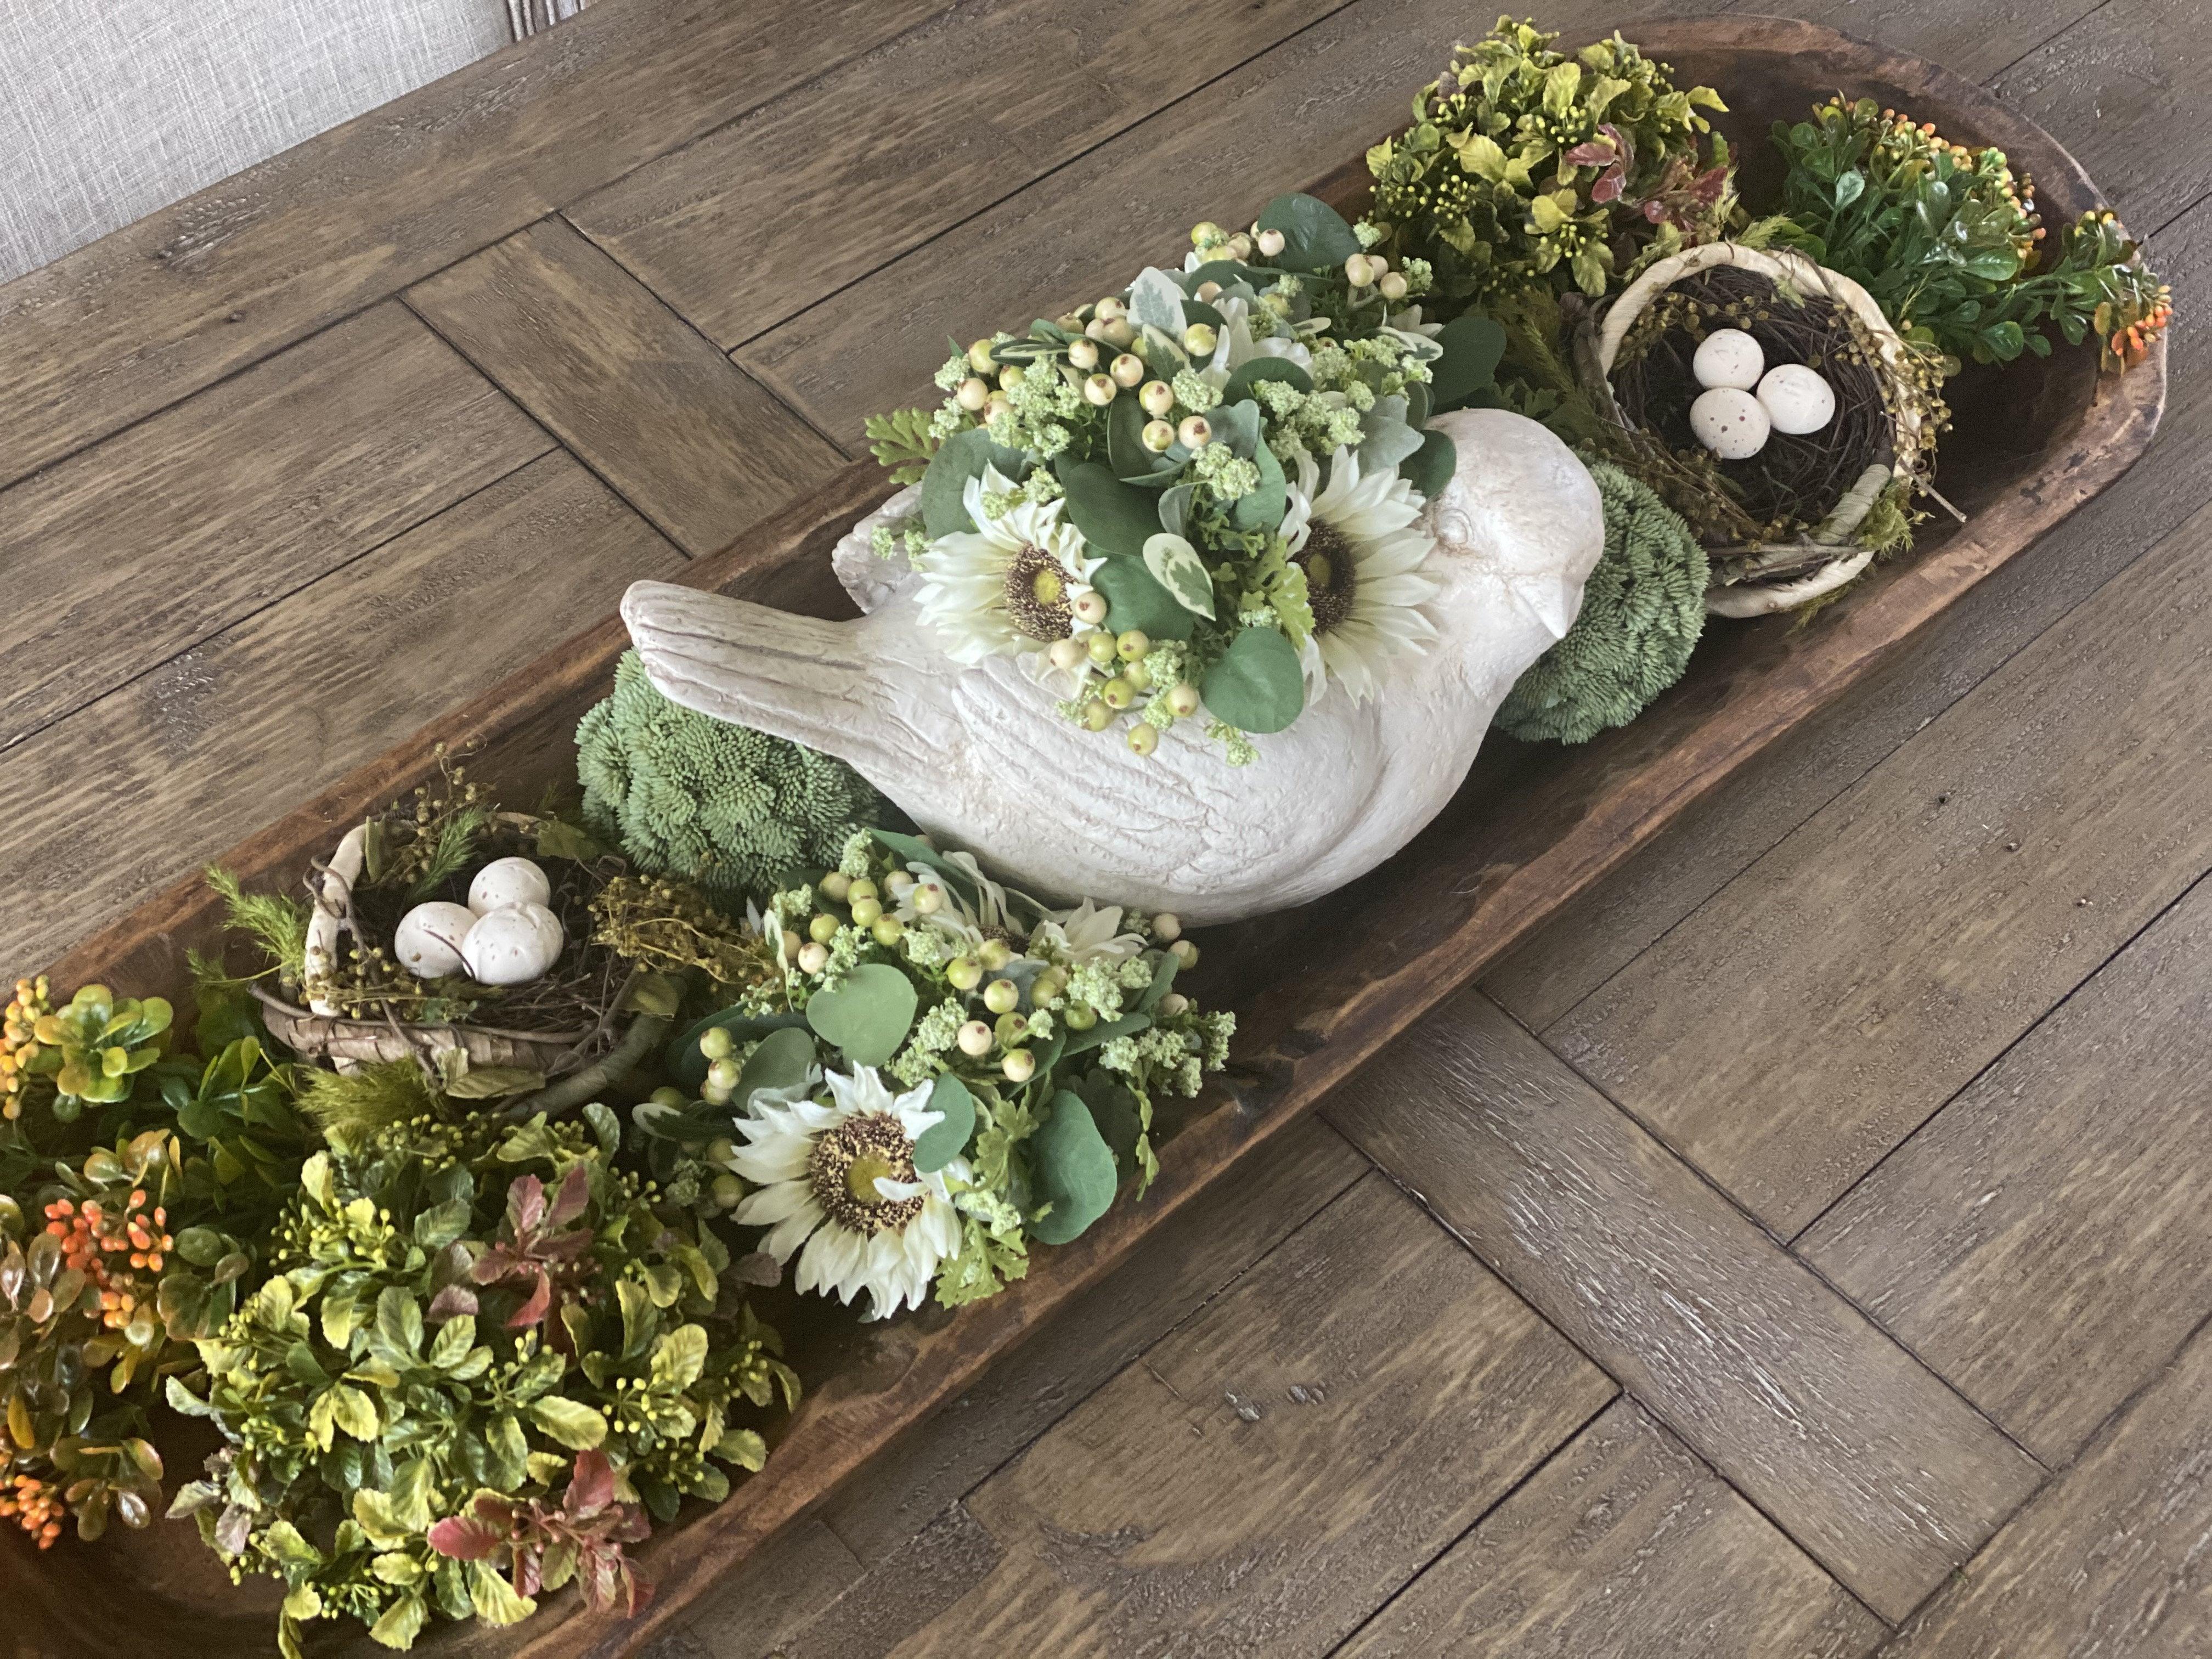 Dove Planter - Assorted Styles - Signastyle Boutique